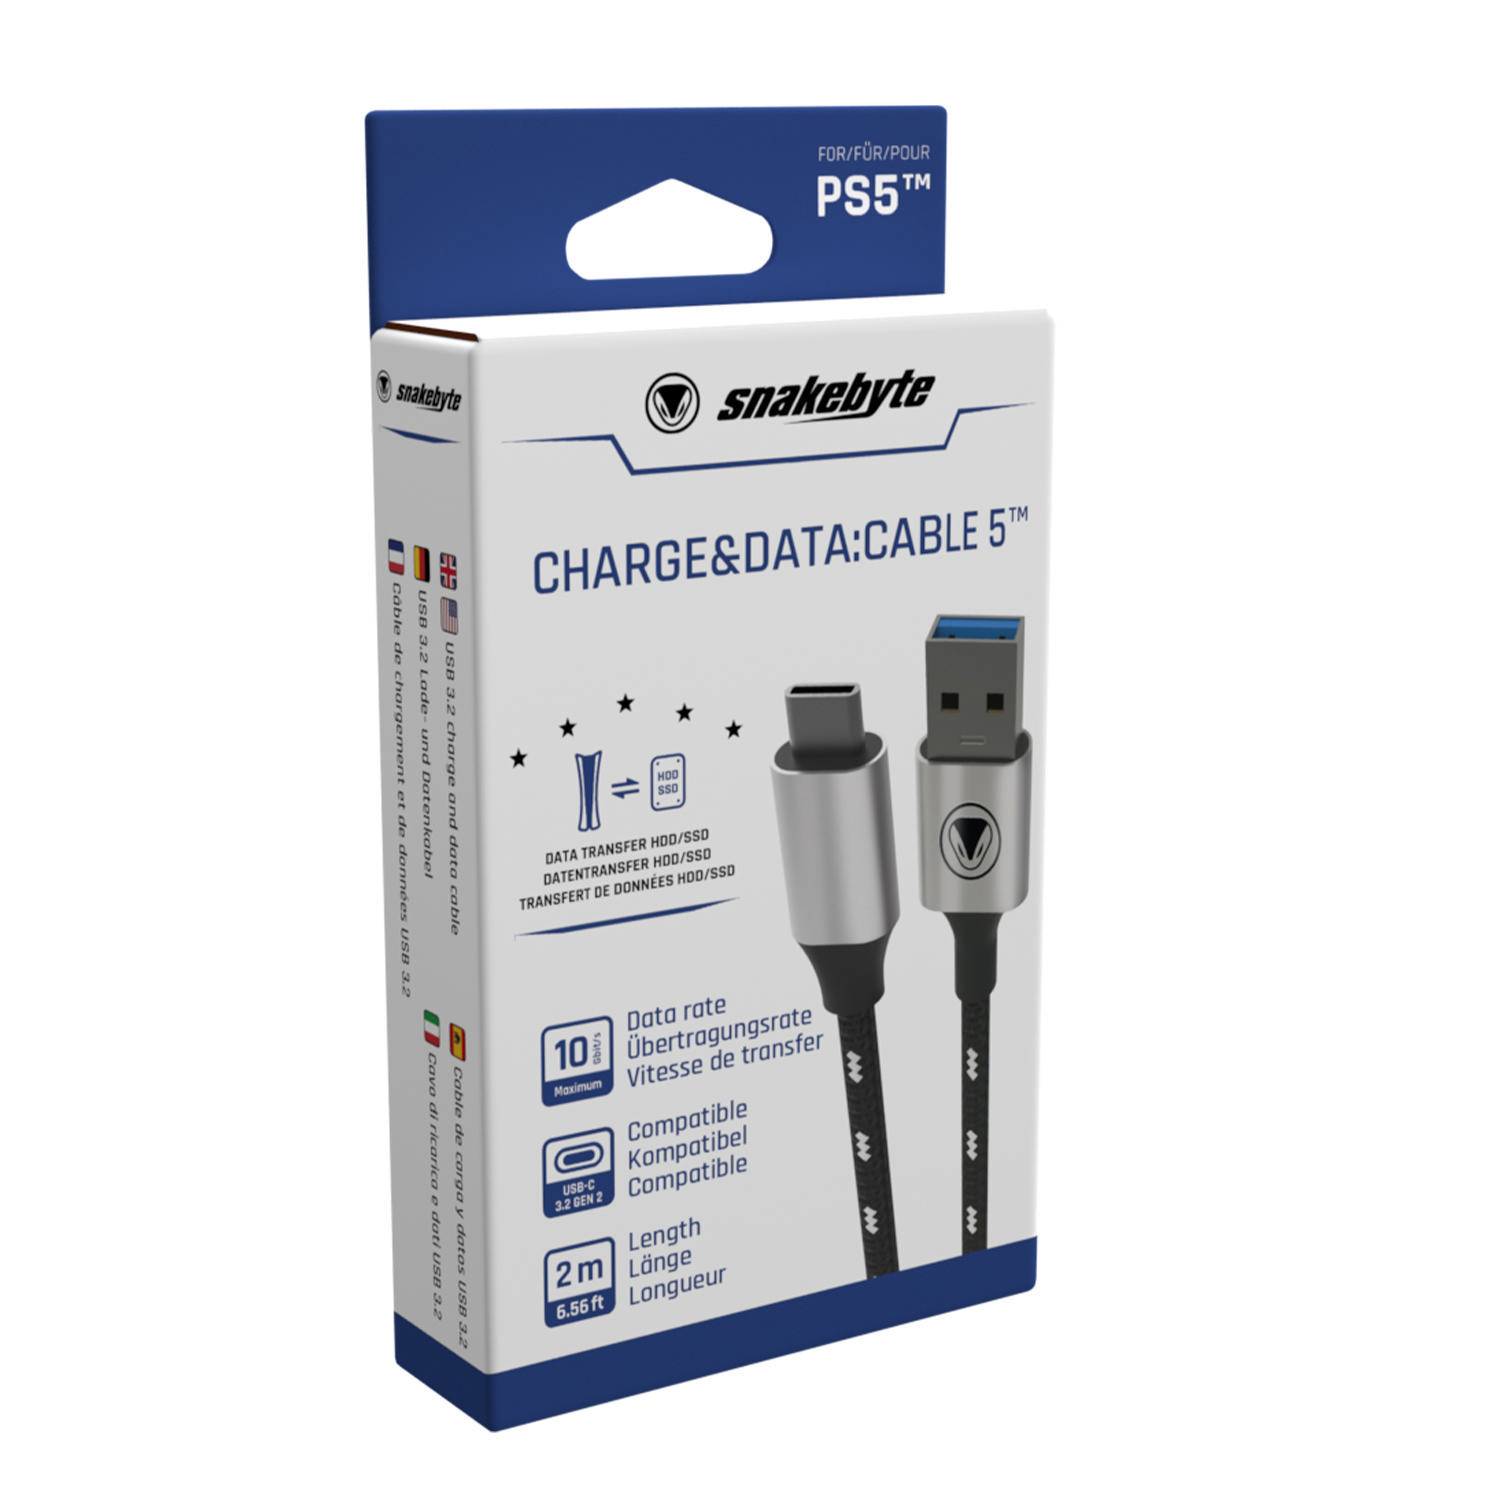 SNAKEBYTE PS5 & 5 USB Charge (2m) PS5, Zubehör Data: Schwarz/Weiß CABLE